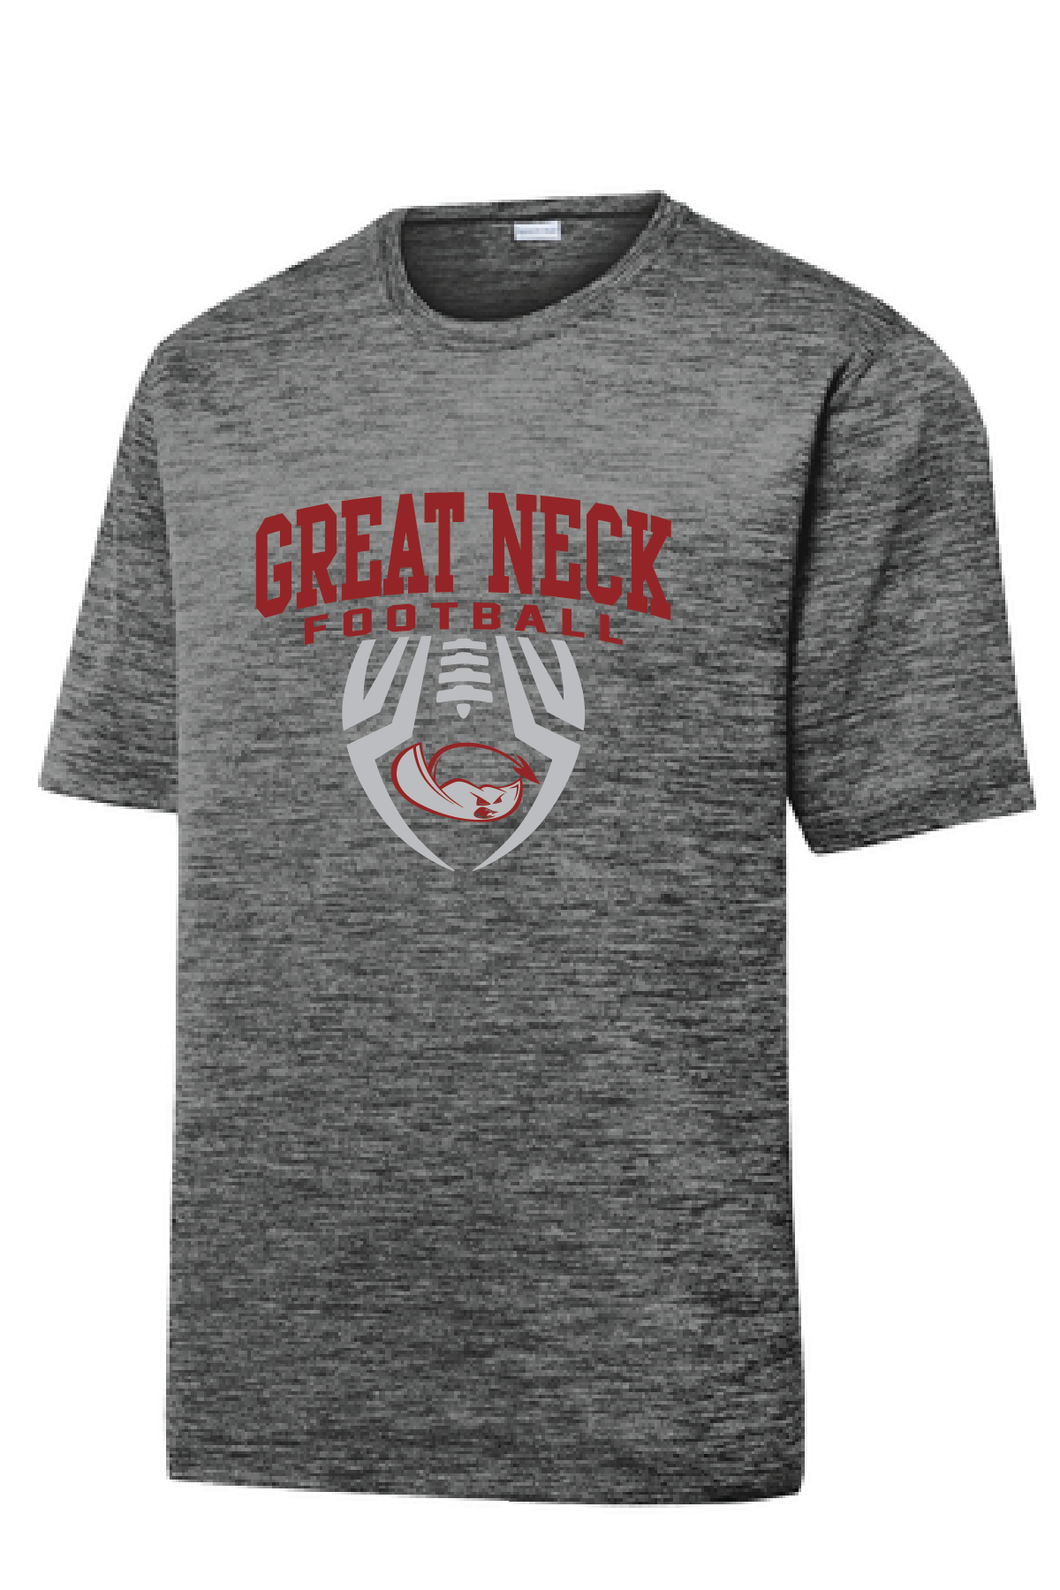 Electric Heather Performance Tee / Black Grey / Great Neck Middle School Football